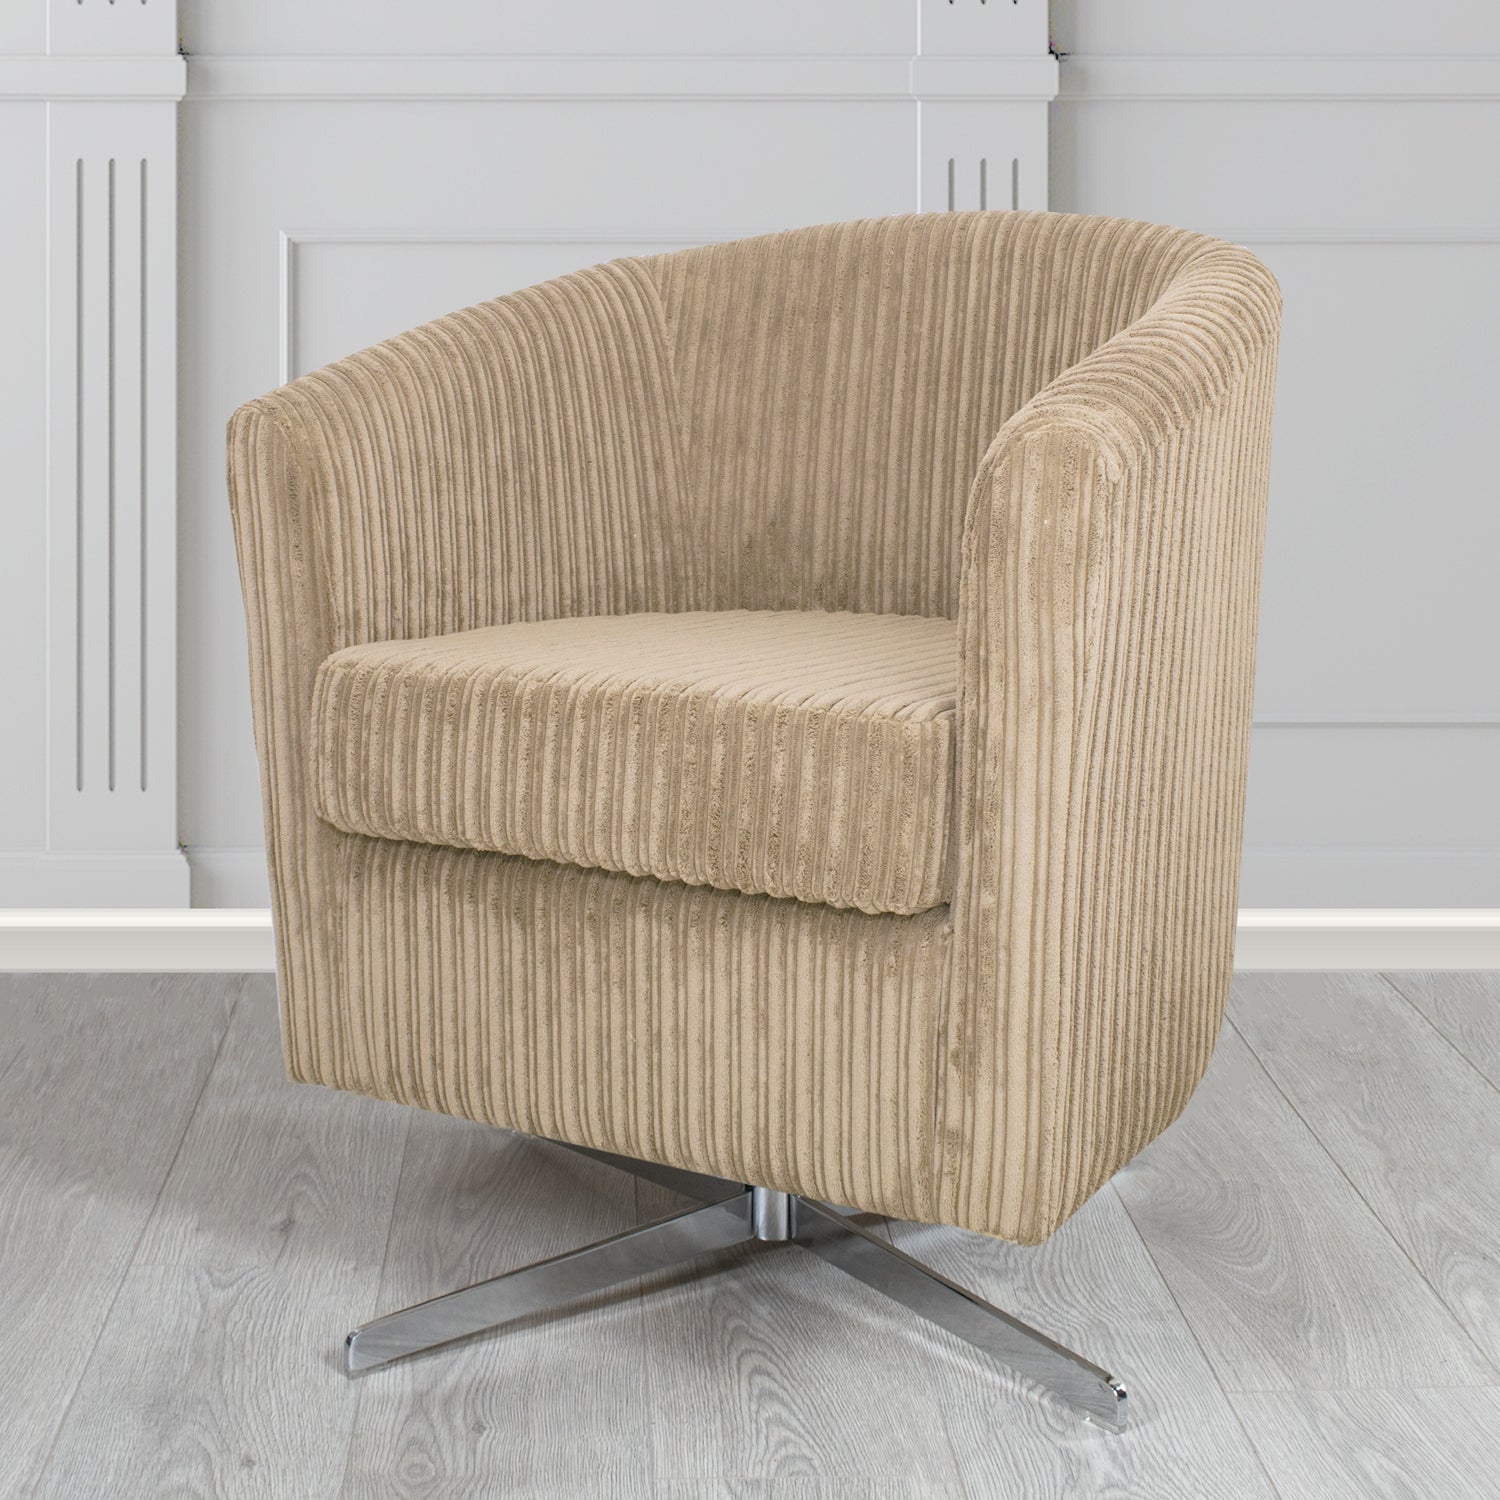 Cannes Swivel Tub Chair in Conway Camel Plain Texture Fabric - The Tub Chair Shop